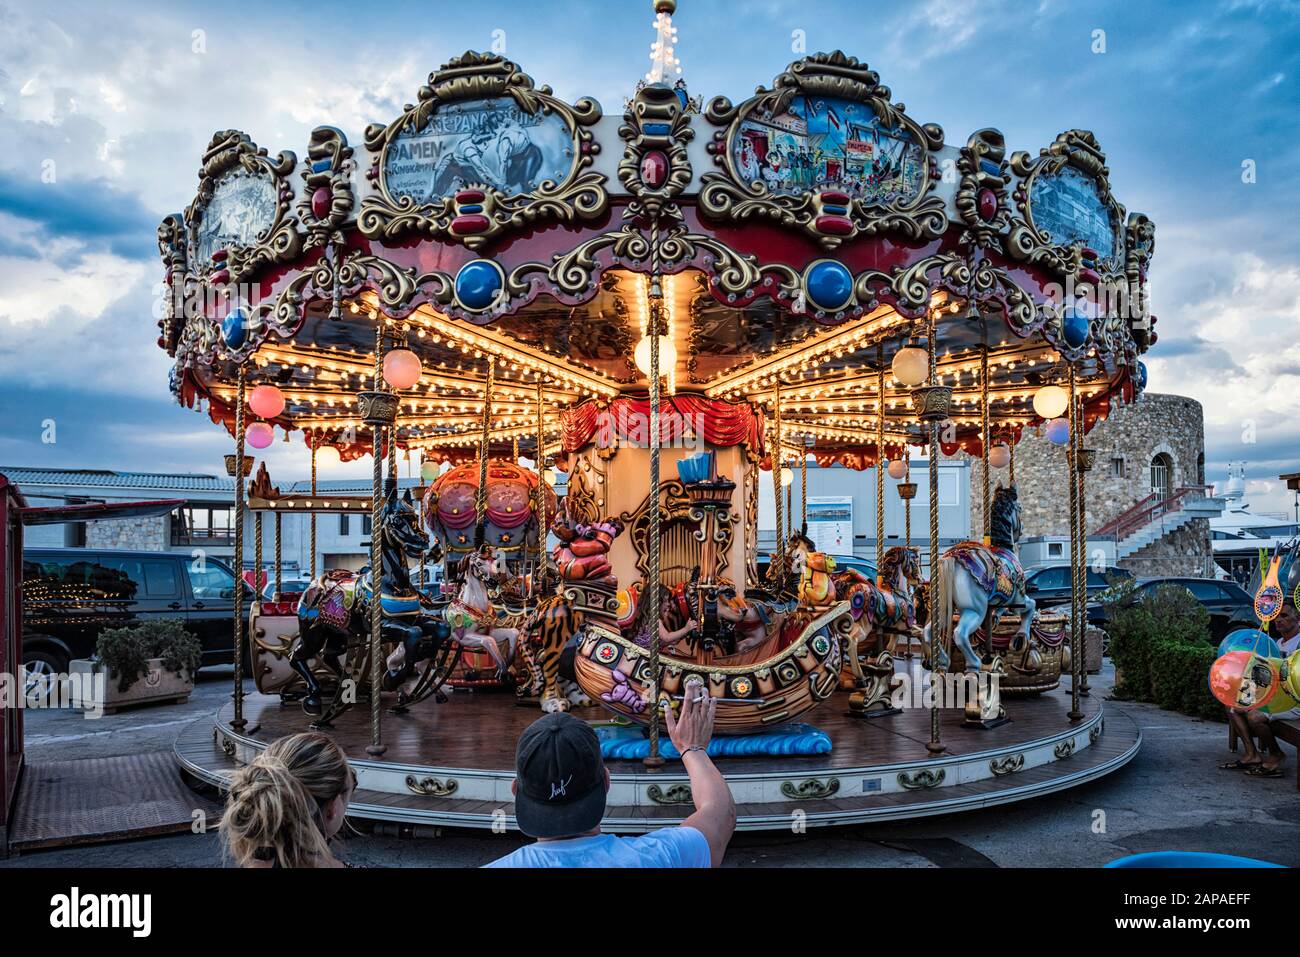 The double deck carousel at St Tropez, France Stock Photo